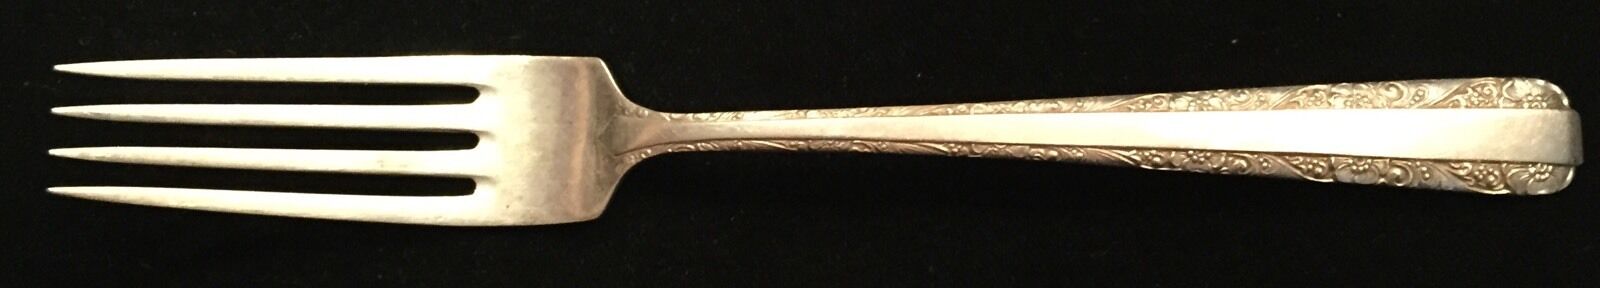 Sterling Silver Flatware - Towle Candlelight Regular Fork